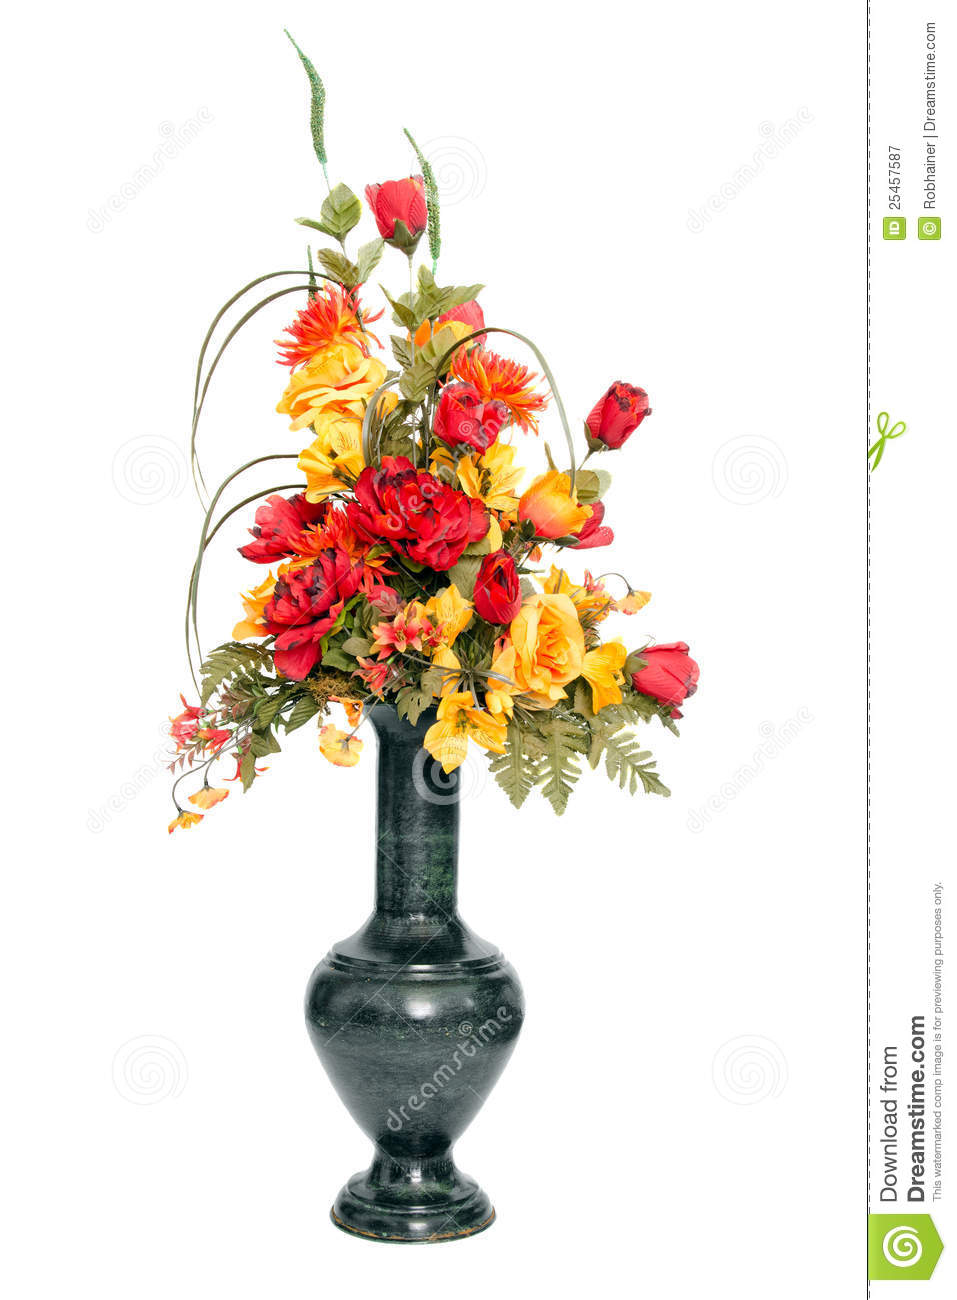 Fall Color Silk Flower Arrangement Royalty Free Stock Photography